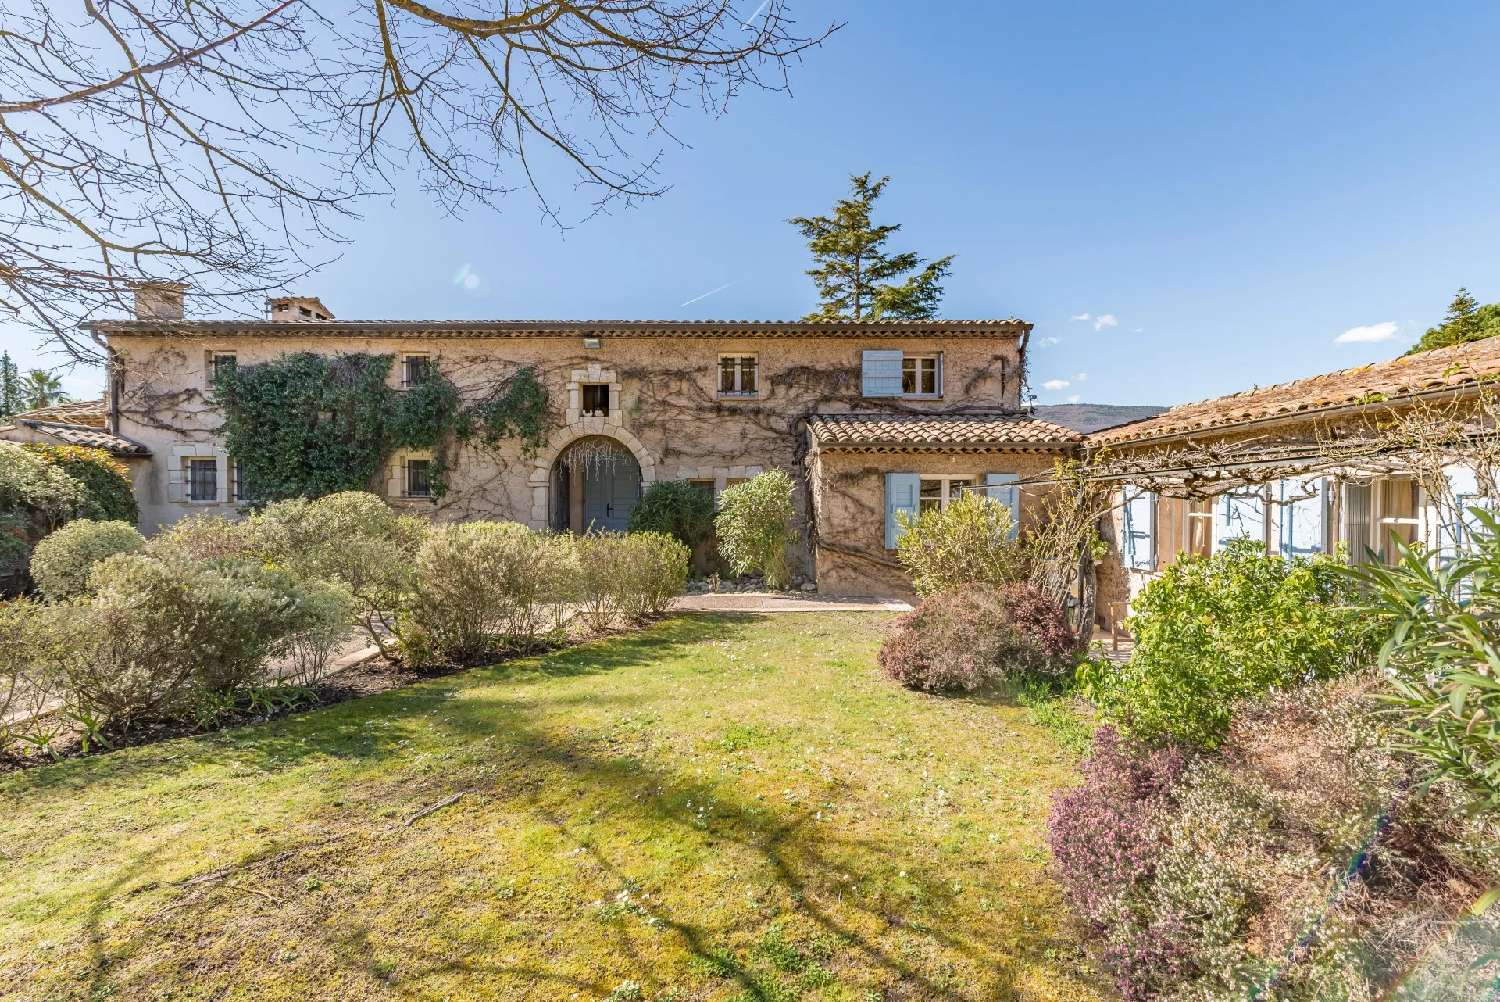  for sale house Châteauneuf-Grasse Alpes-Maritimes 4